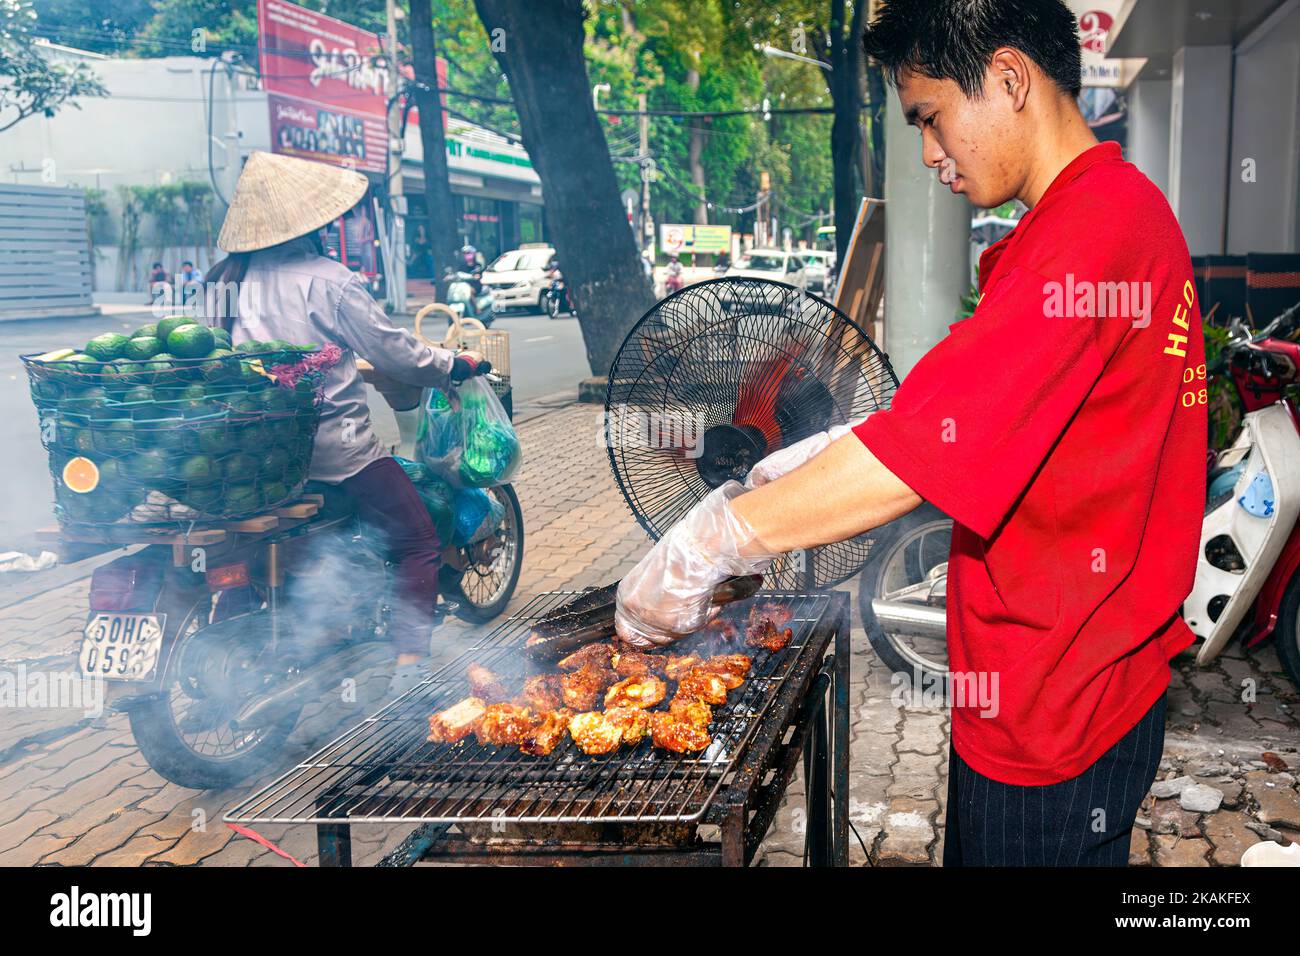 Vietnamese man cooking at roadside barbecue in street market, Ho Chi Minh City, Vietnam Stock Photo